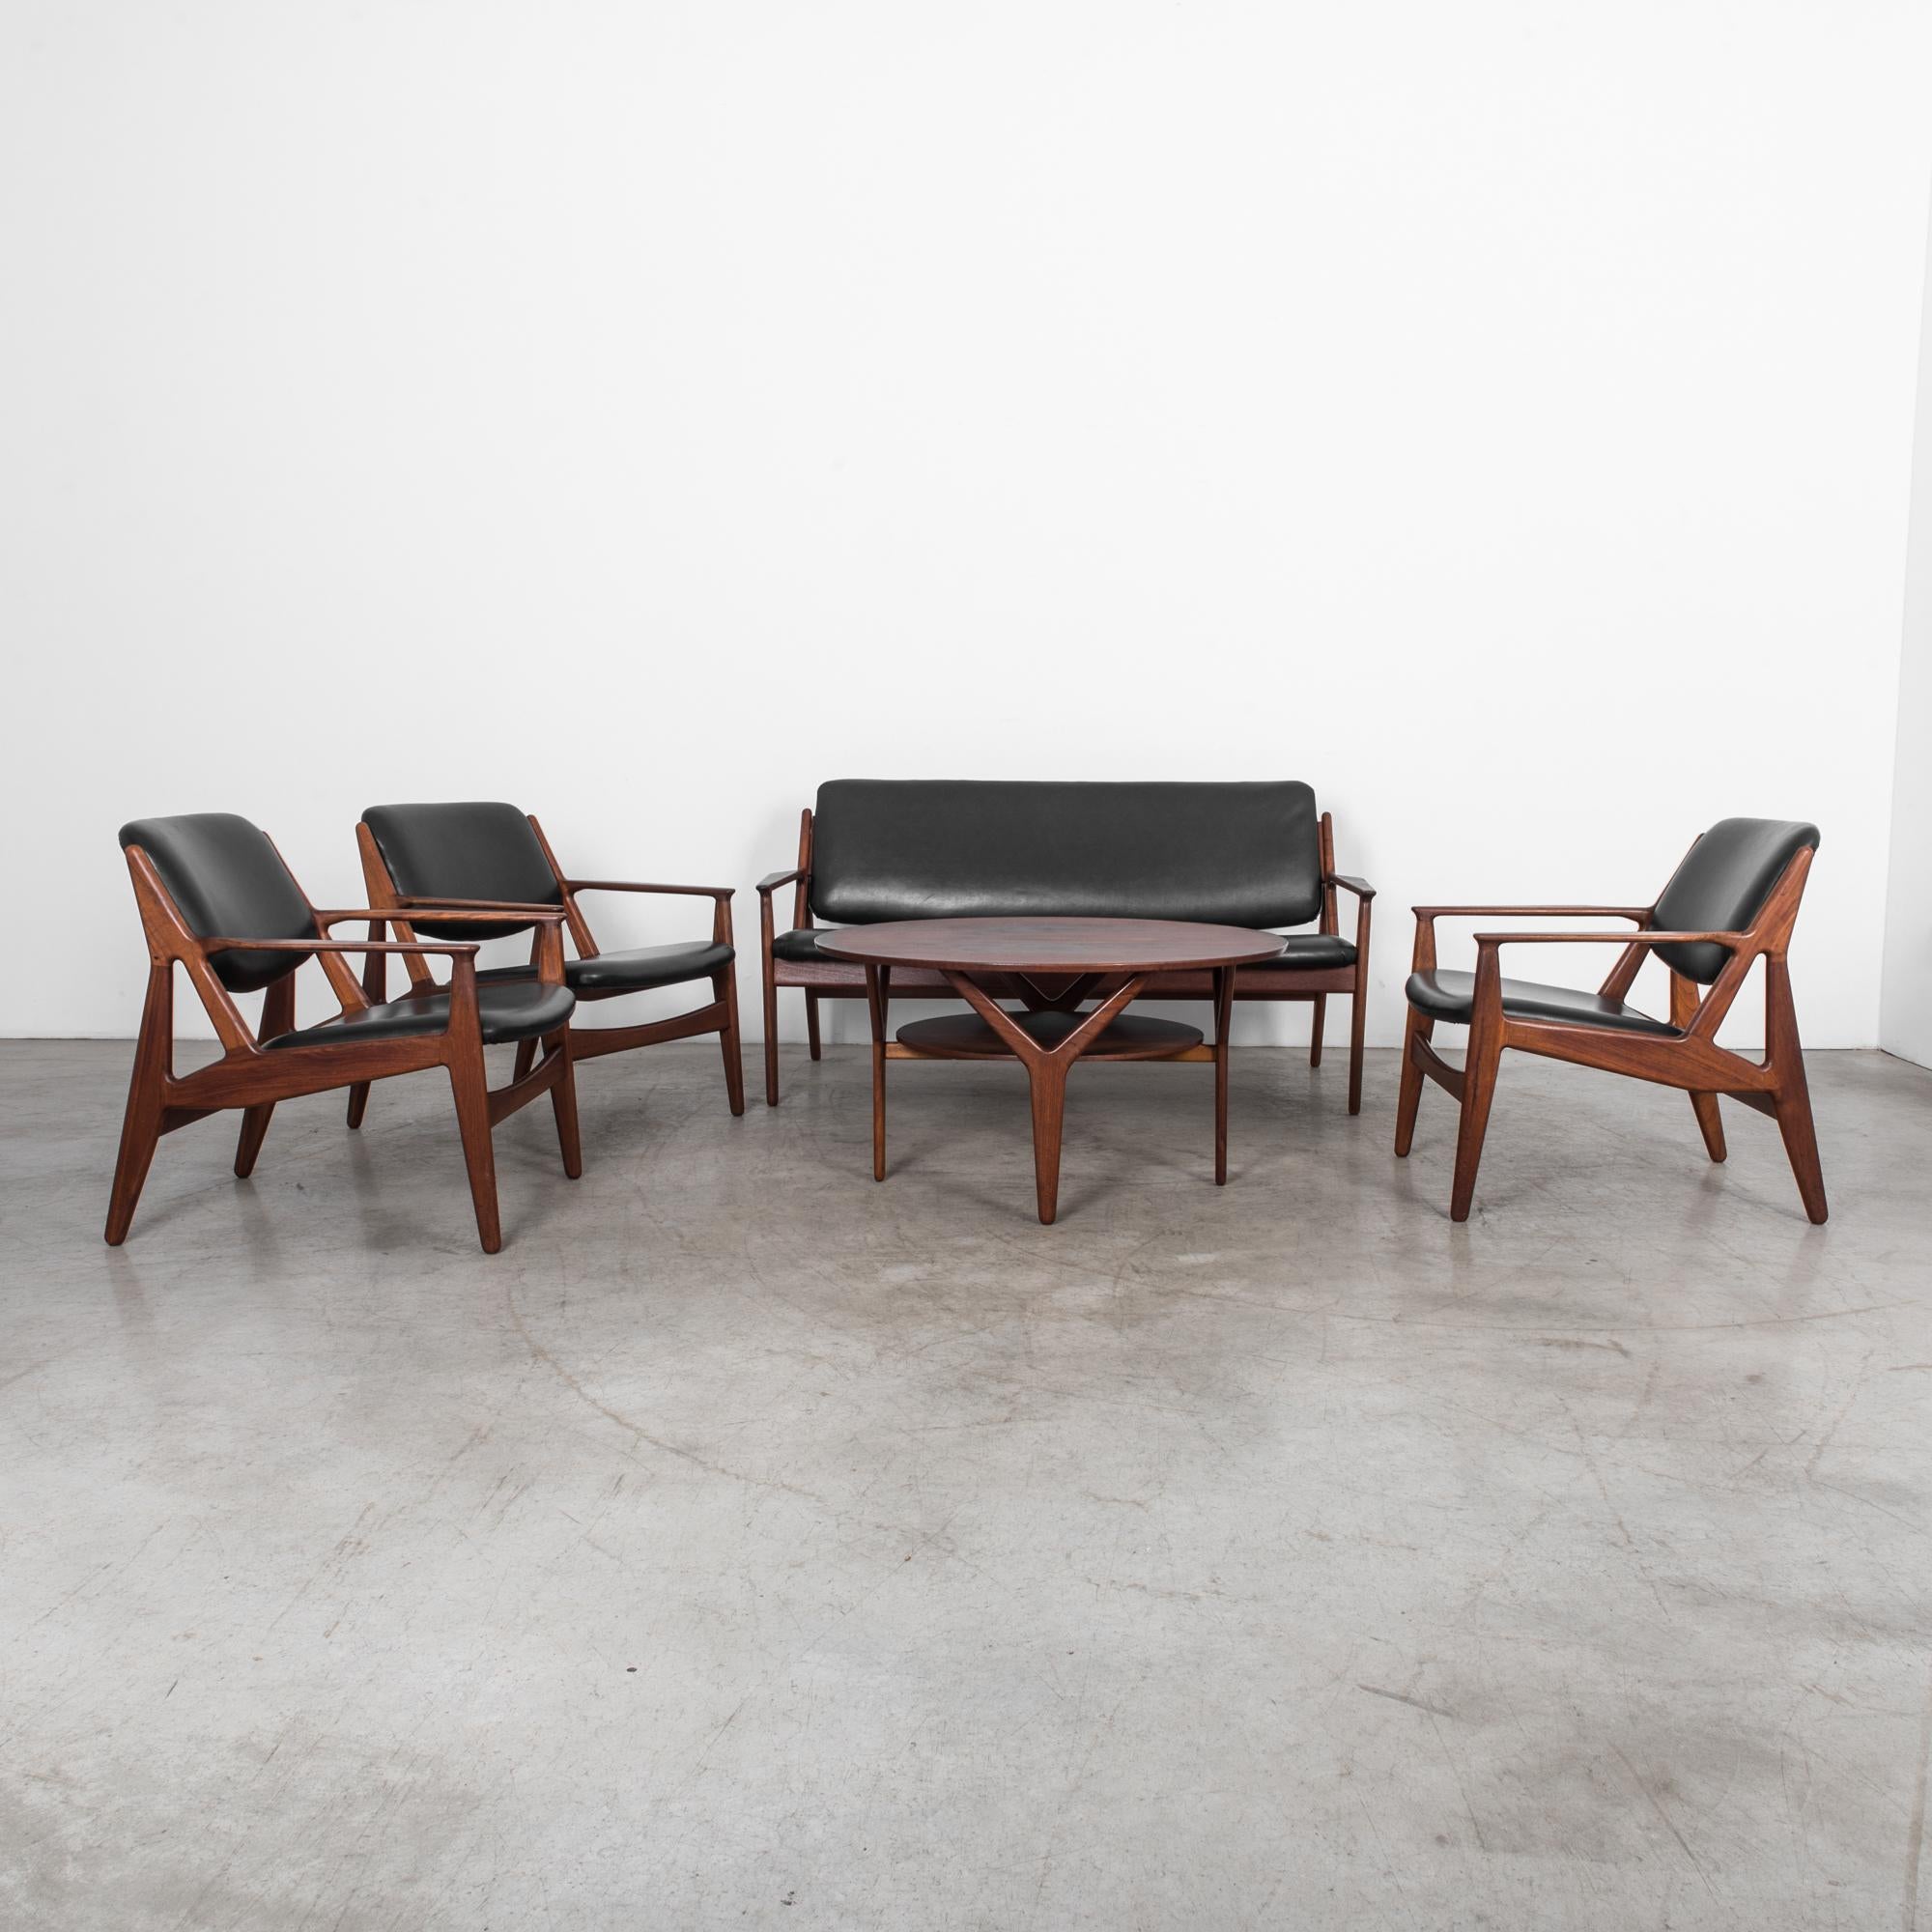 Set of five pieces by Arne Vodder, produced in Denmark, circa 1960. Three armchairs, sofa and table. A characteristic sleek midcentury design in teak. Masterfully finished with natural oils for a distinctive warm glow, highlighting the beauty of the